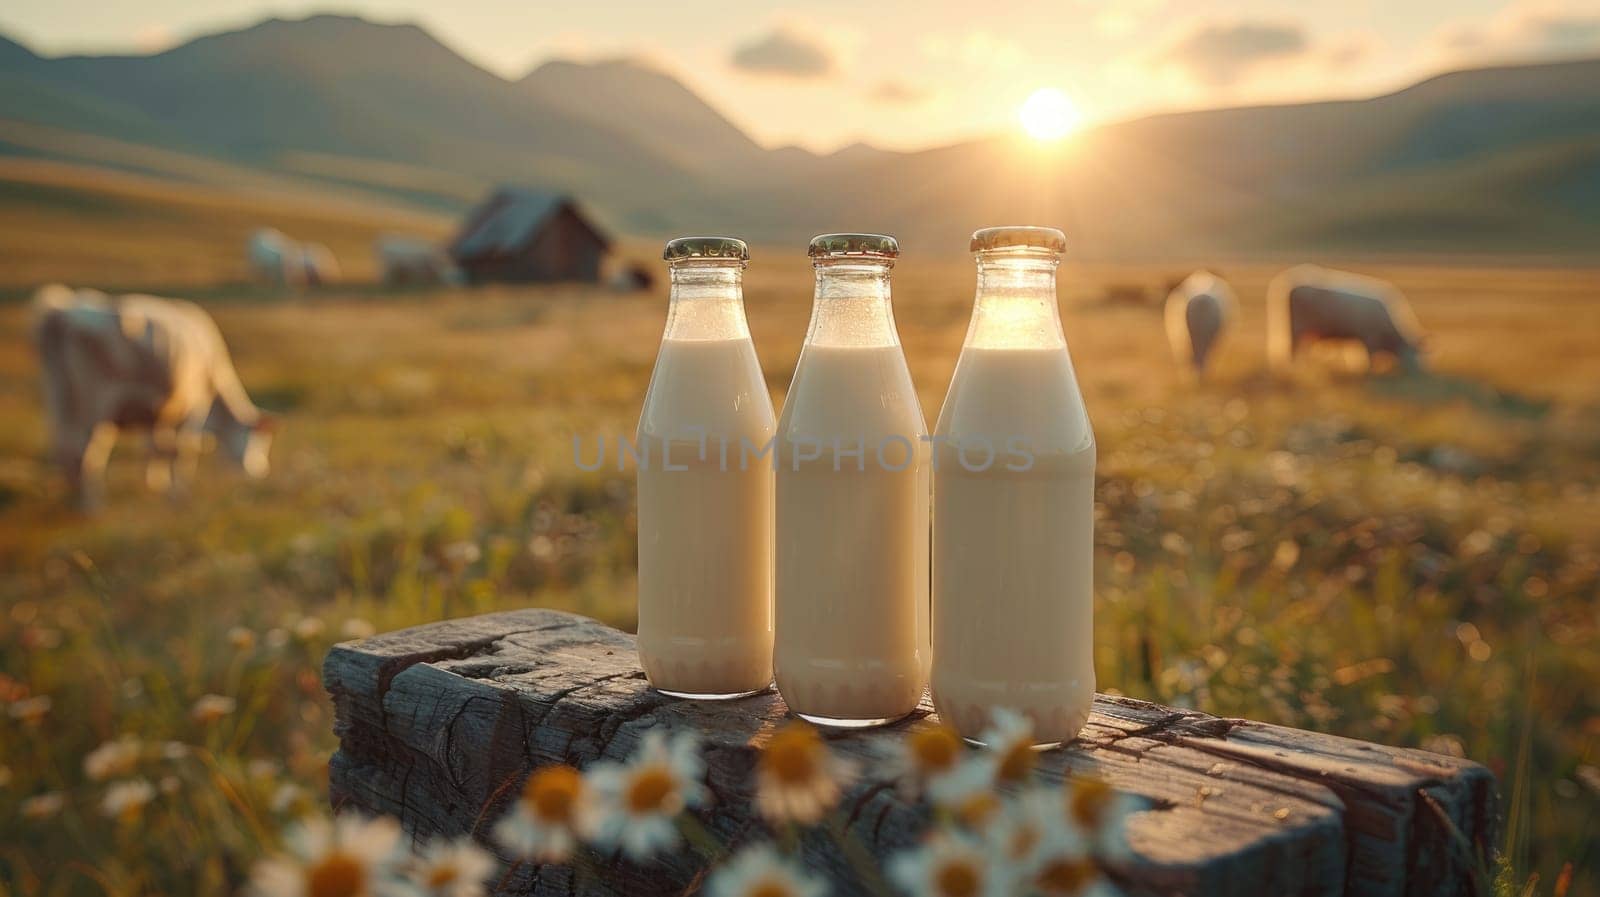 Beautiful glass bottle of milk on wooden desk table top with cow and nature background.